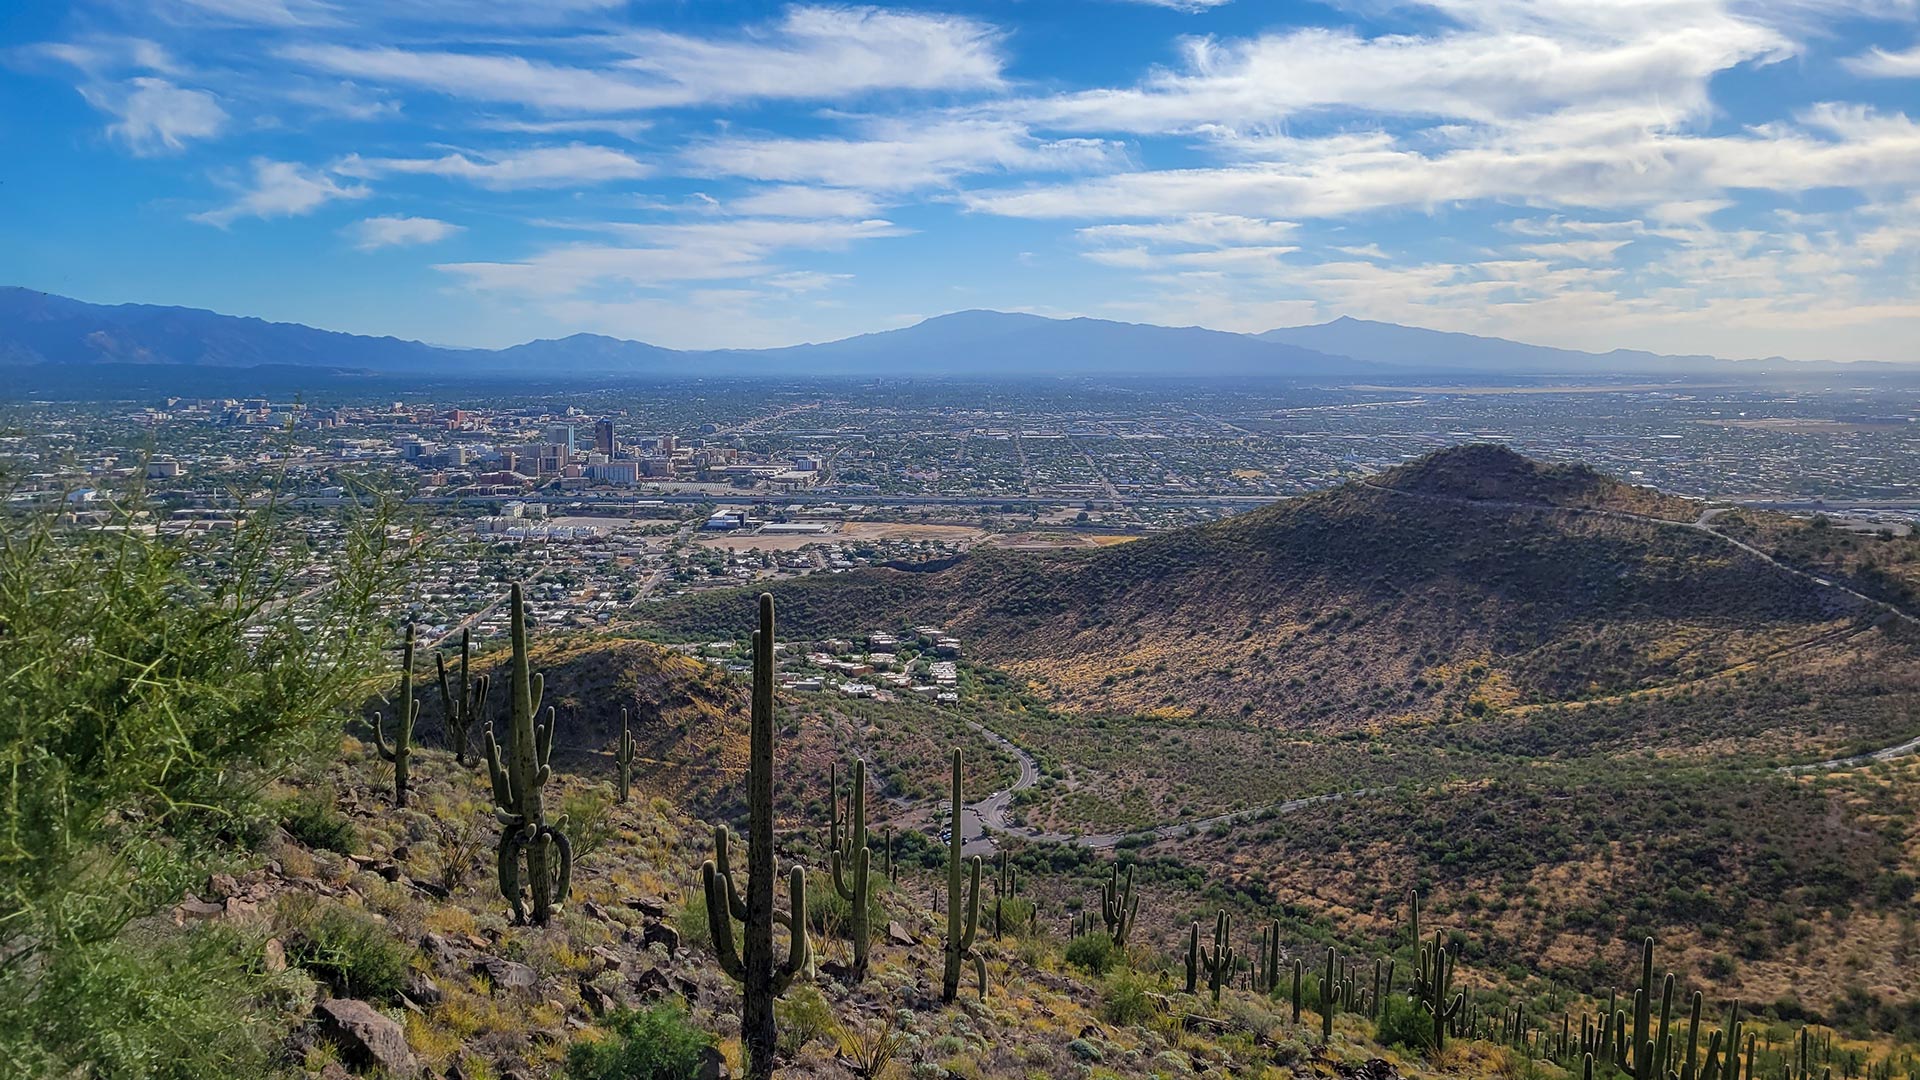 Looking east towards downtown Tucson from Tumamoc Hill. From January 2022.